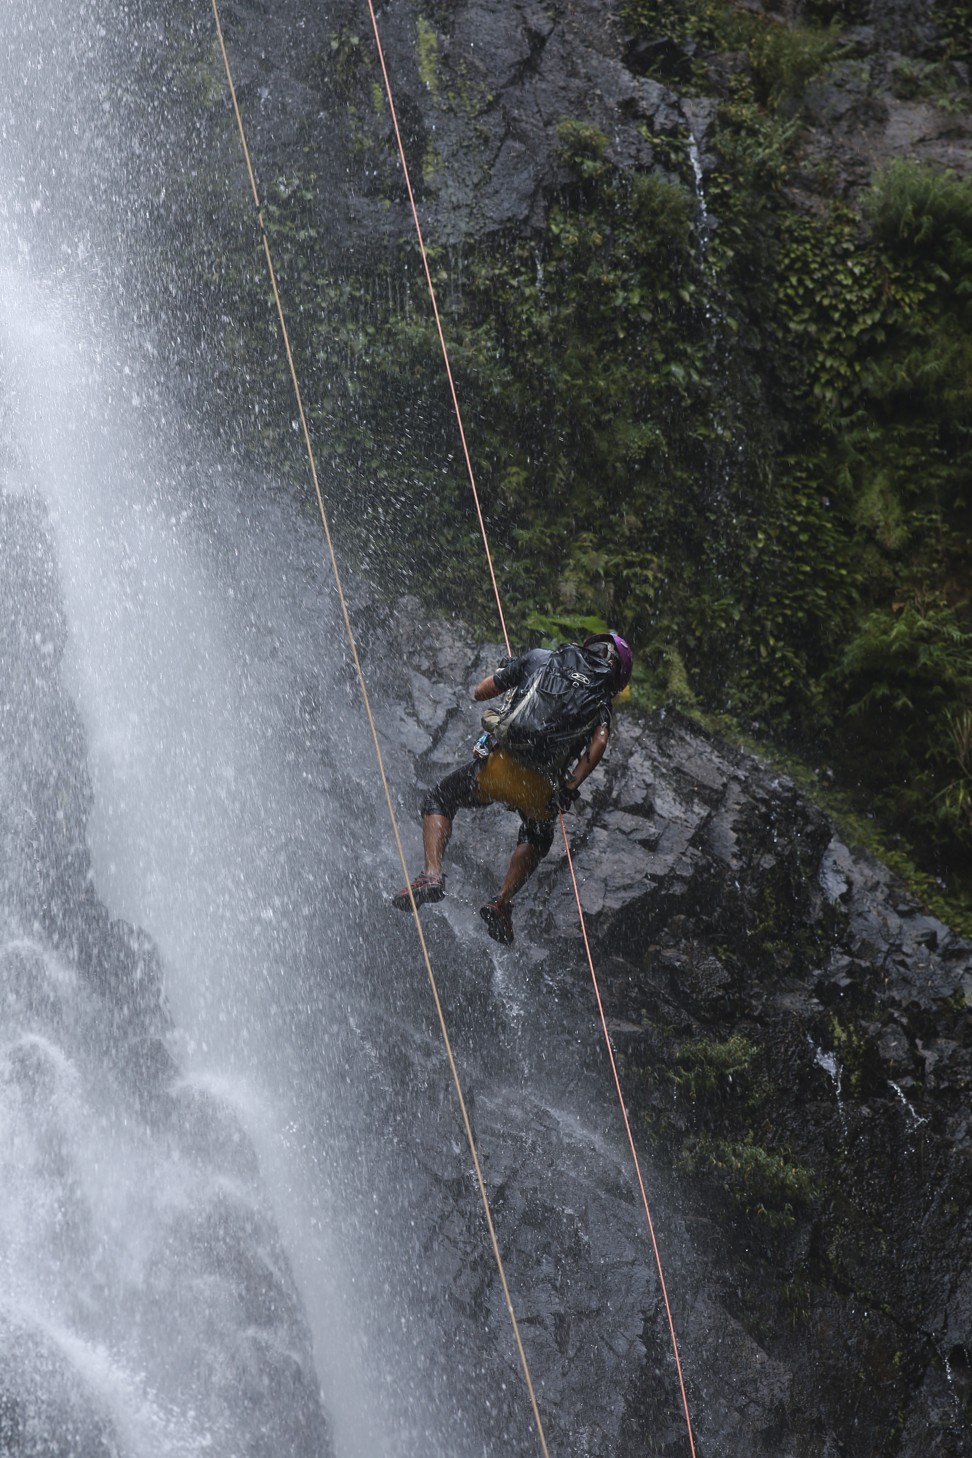 Yu abseils through the spray of a waterfall. Photo: James Wendlinger